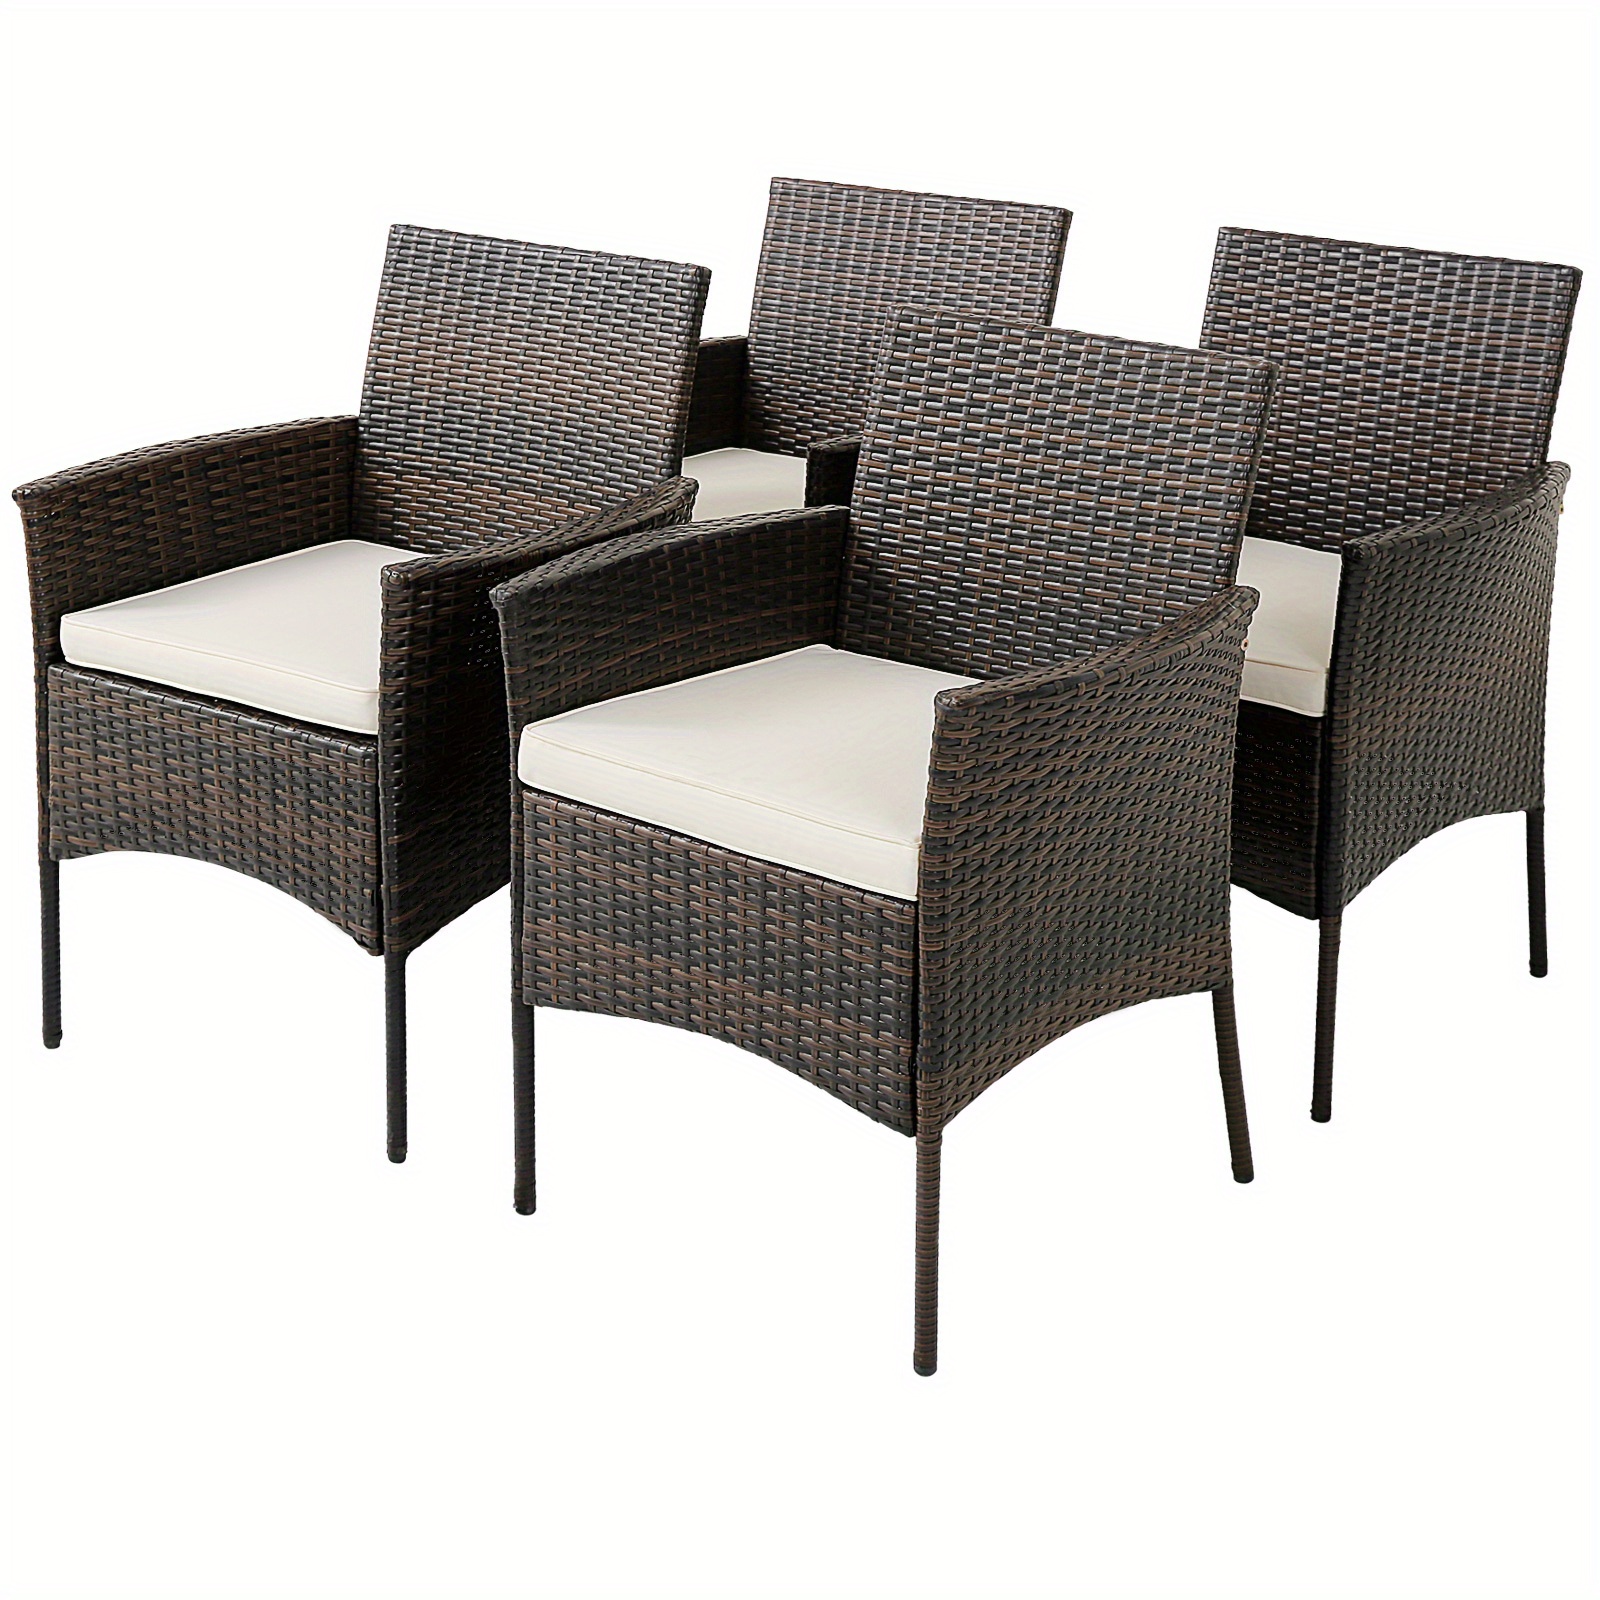 

Set Of 4 Patio Rattan Dining Chairs Cushioned Seat Curved Armrests Outdoor Porch